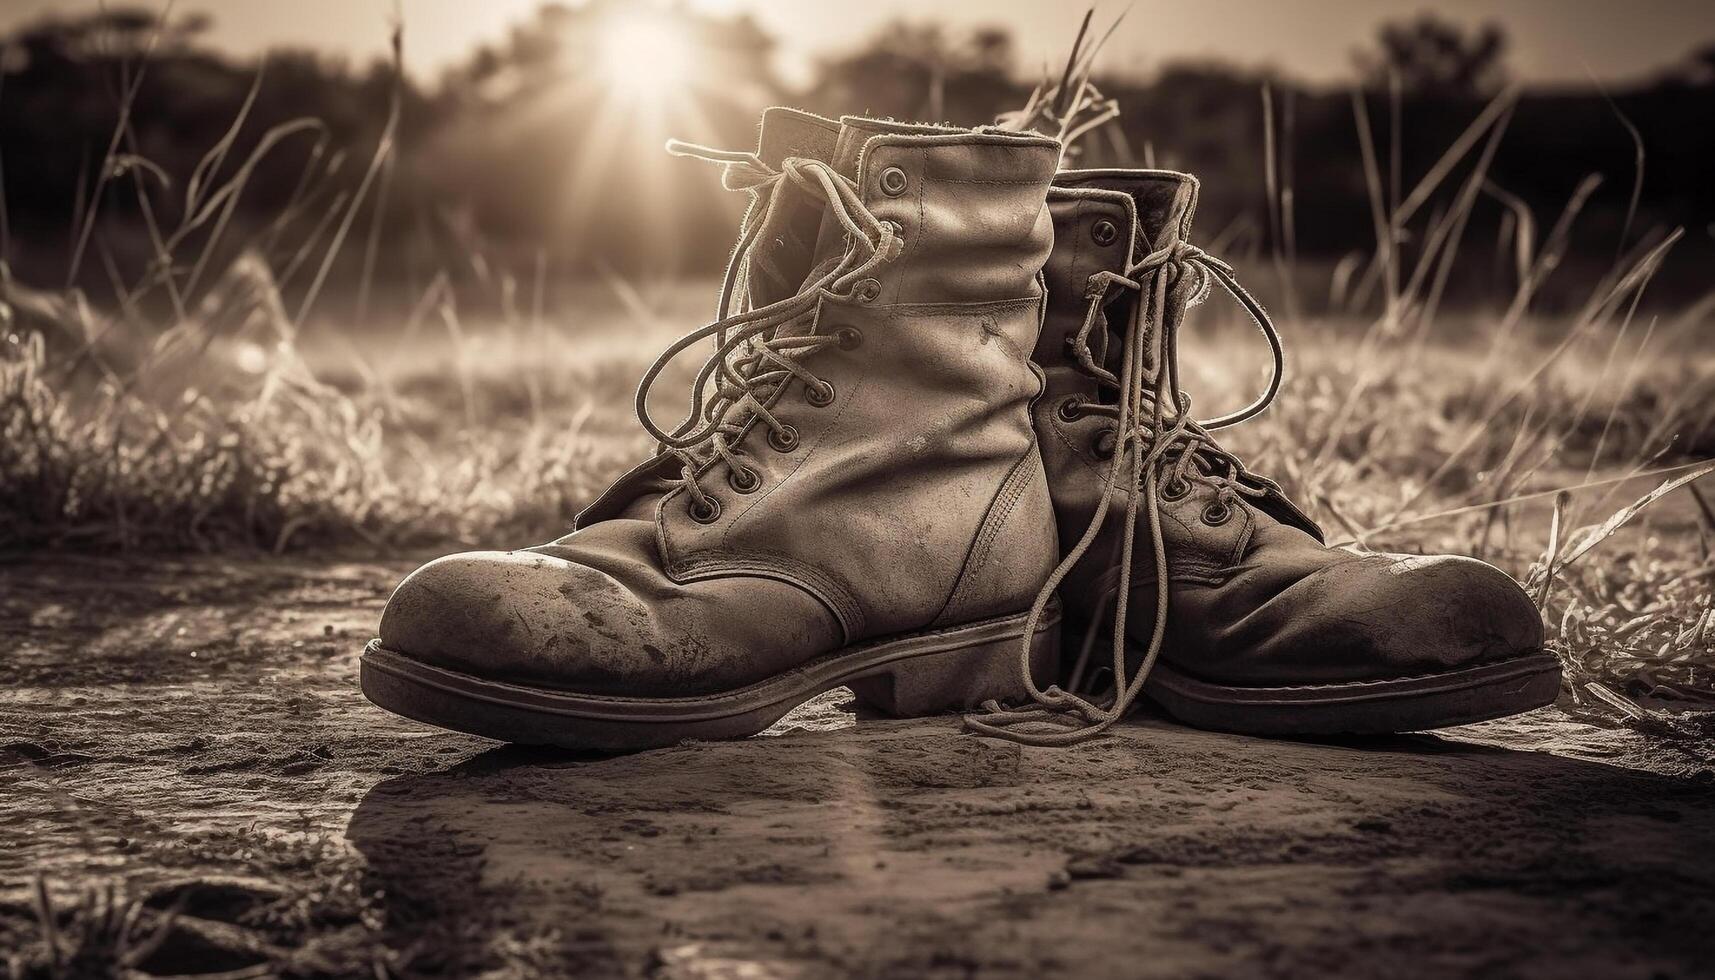 Army Boots Stock Photos, Images and Backgrounds for Free Download